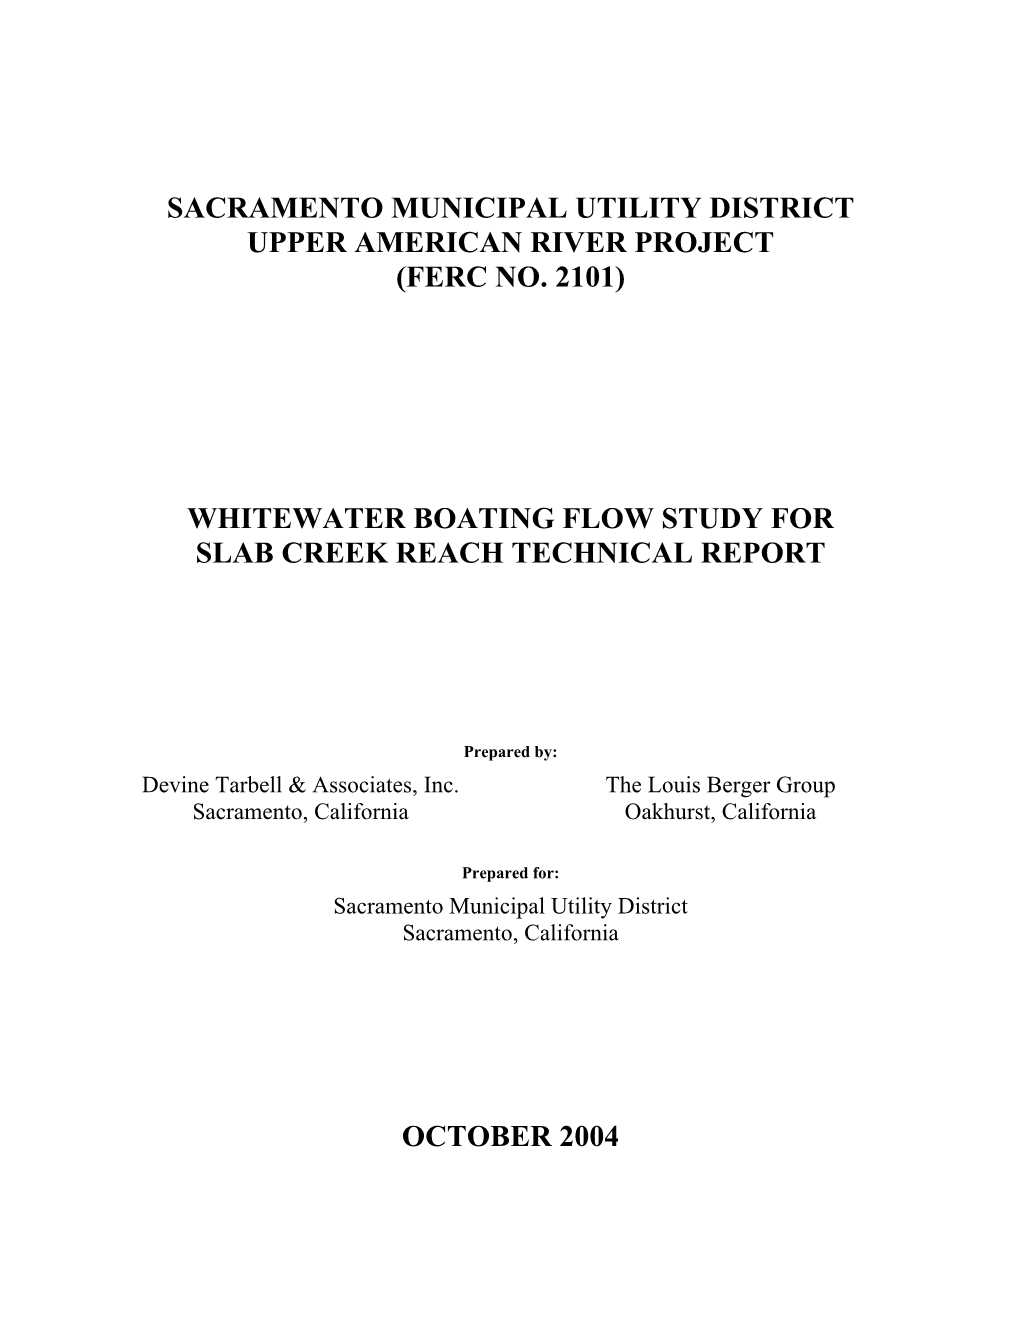 Whitewater Boating Flow Study for Slab Creek Reach Technical Report